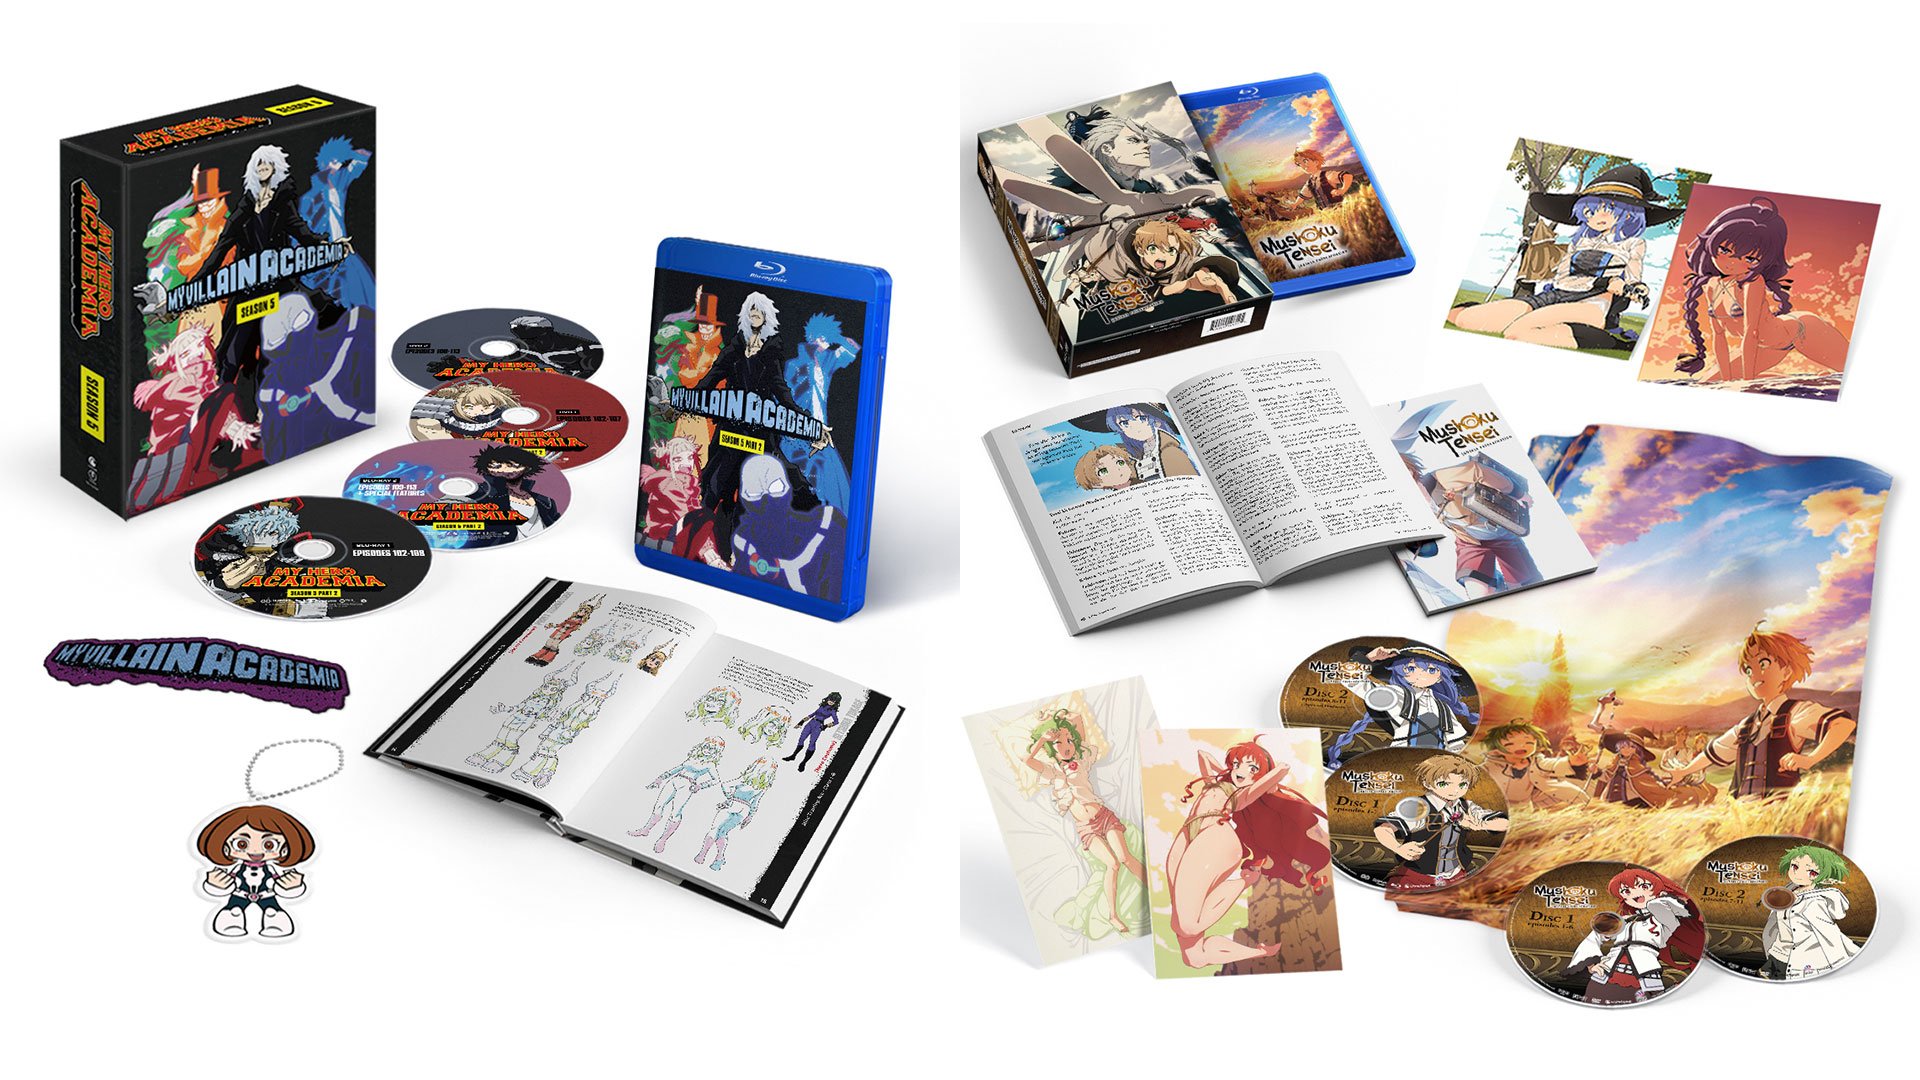 Anime Bluray Movies and Releases